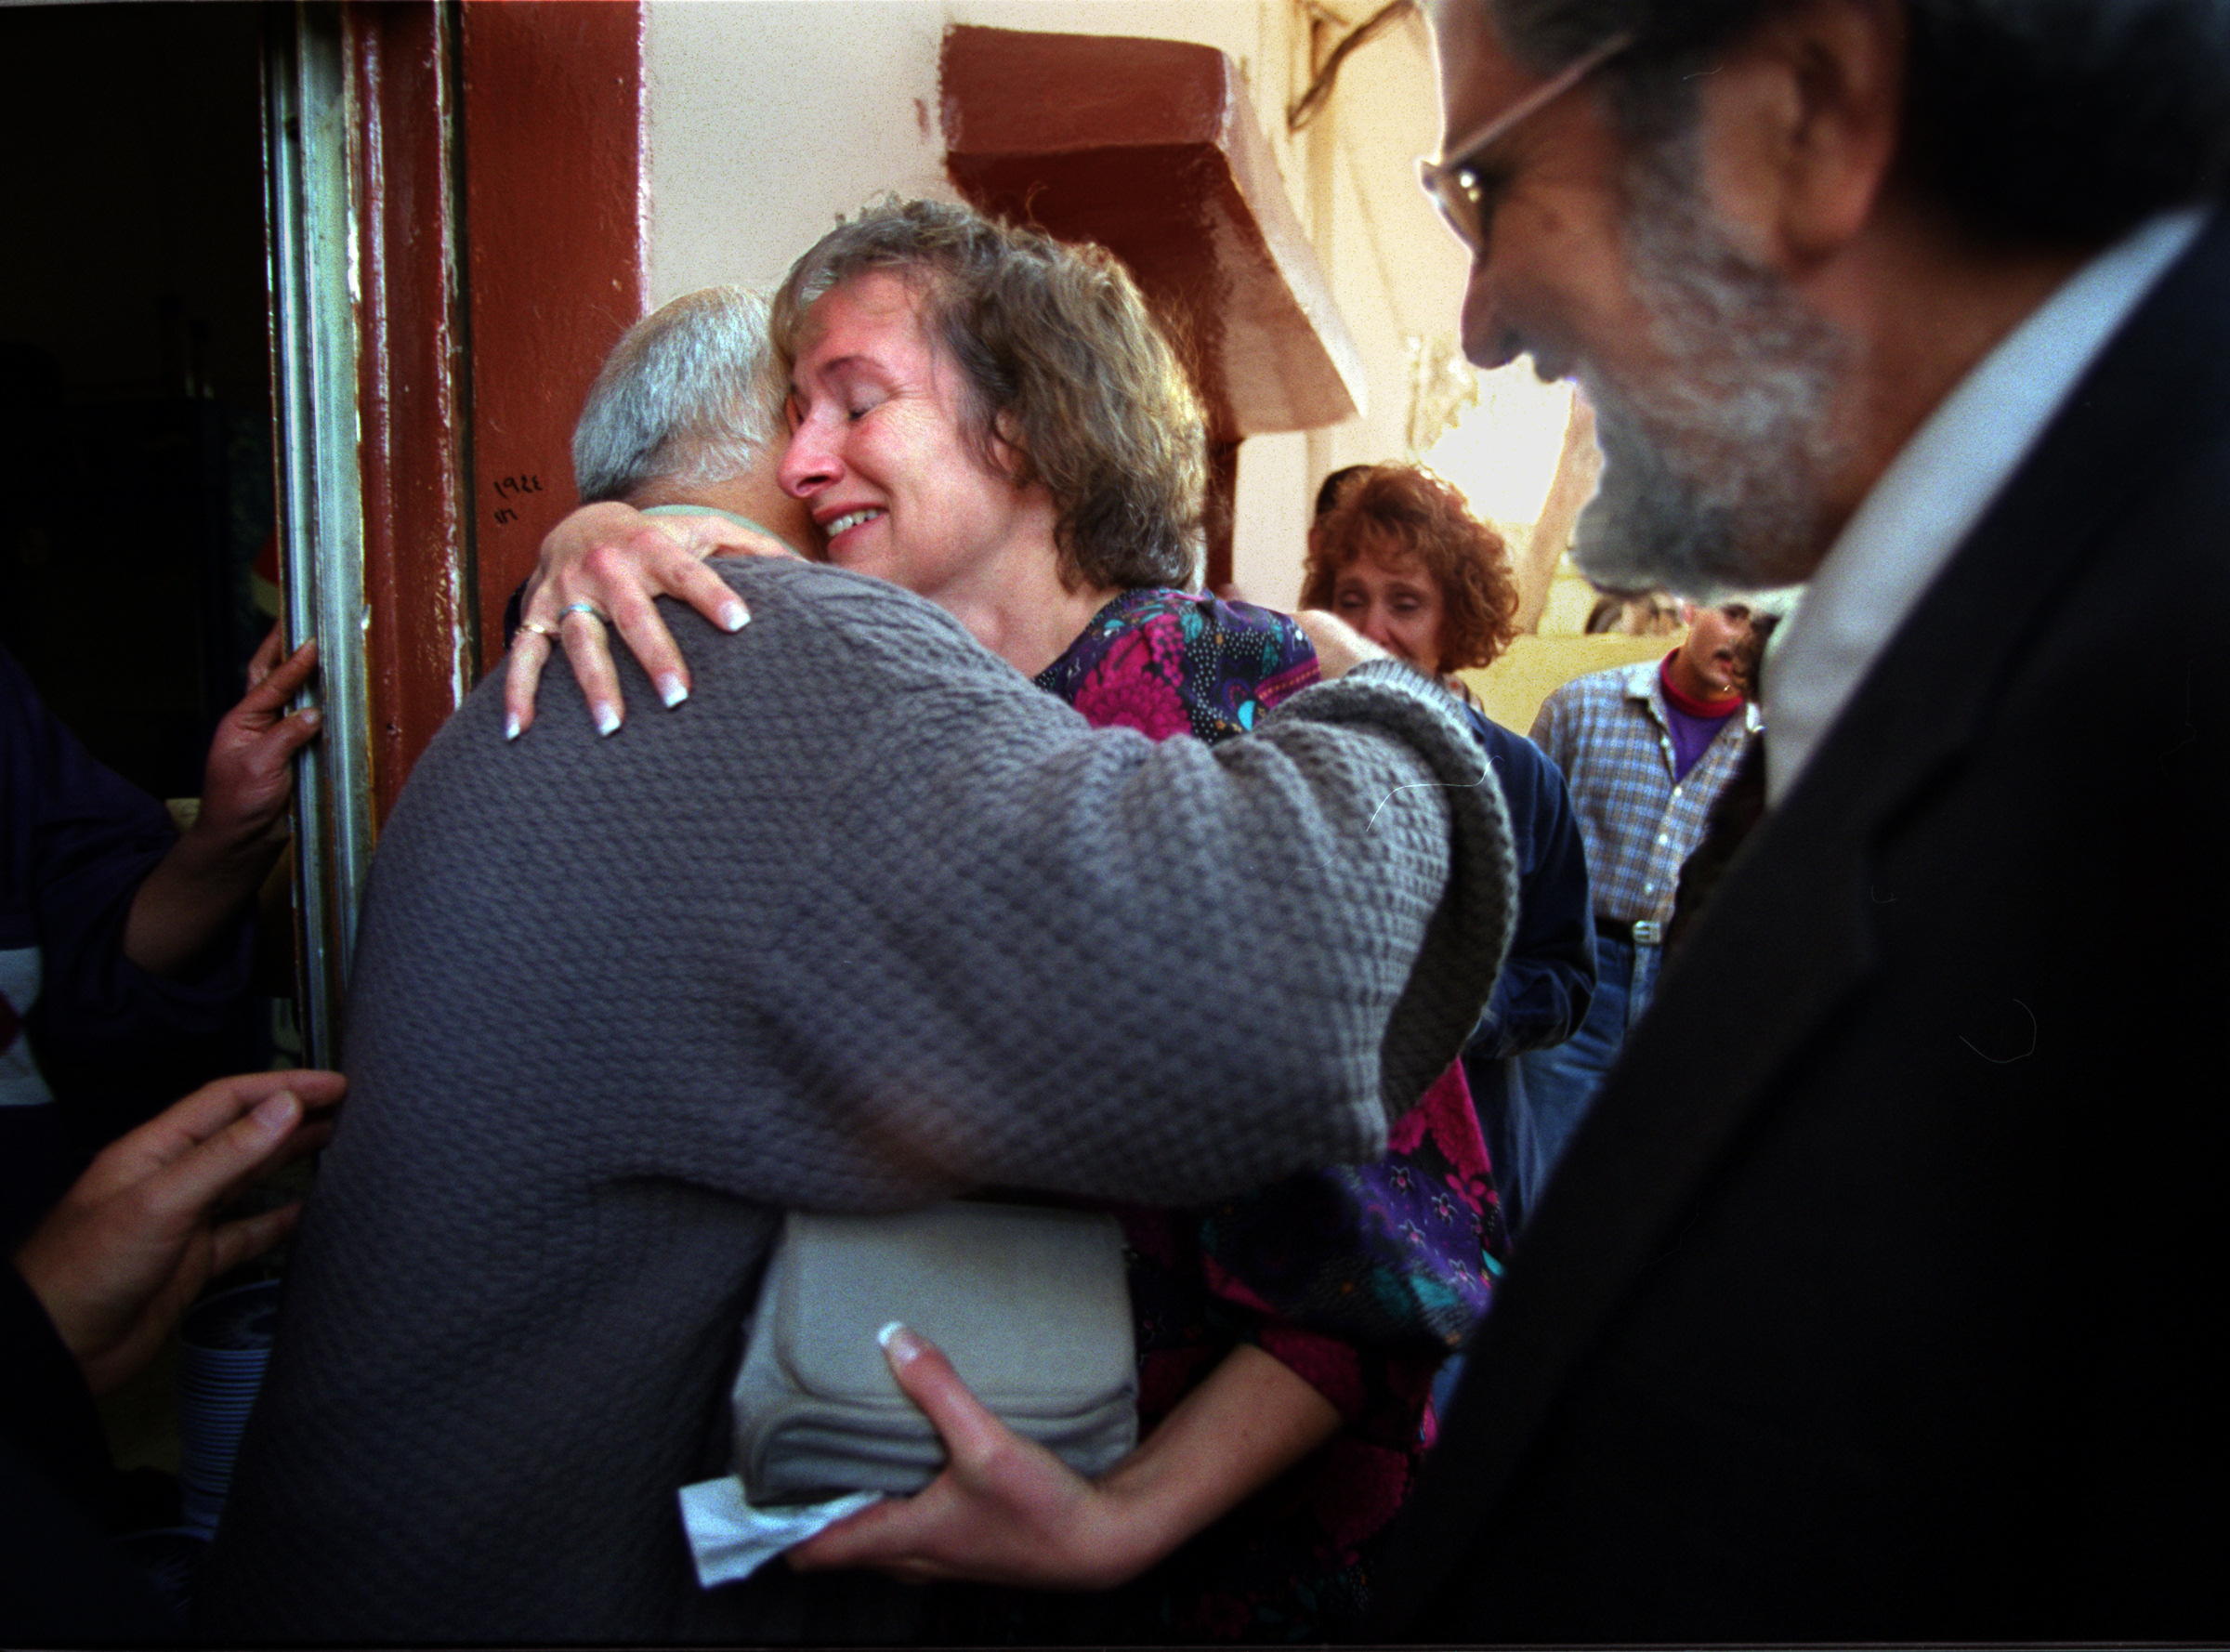  At a restaurant in Jerash,&nbsp; owner Ishmael Shuqqir, left, hugs Barbara King after confrontation resolved with Rabi King, right. Owner was upset with Muslim leader whom had brought Jews into his restaurant. Some of the Jews, including the Rabi co